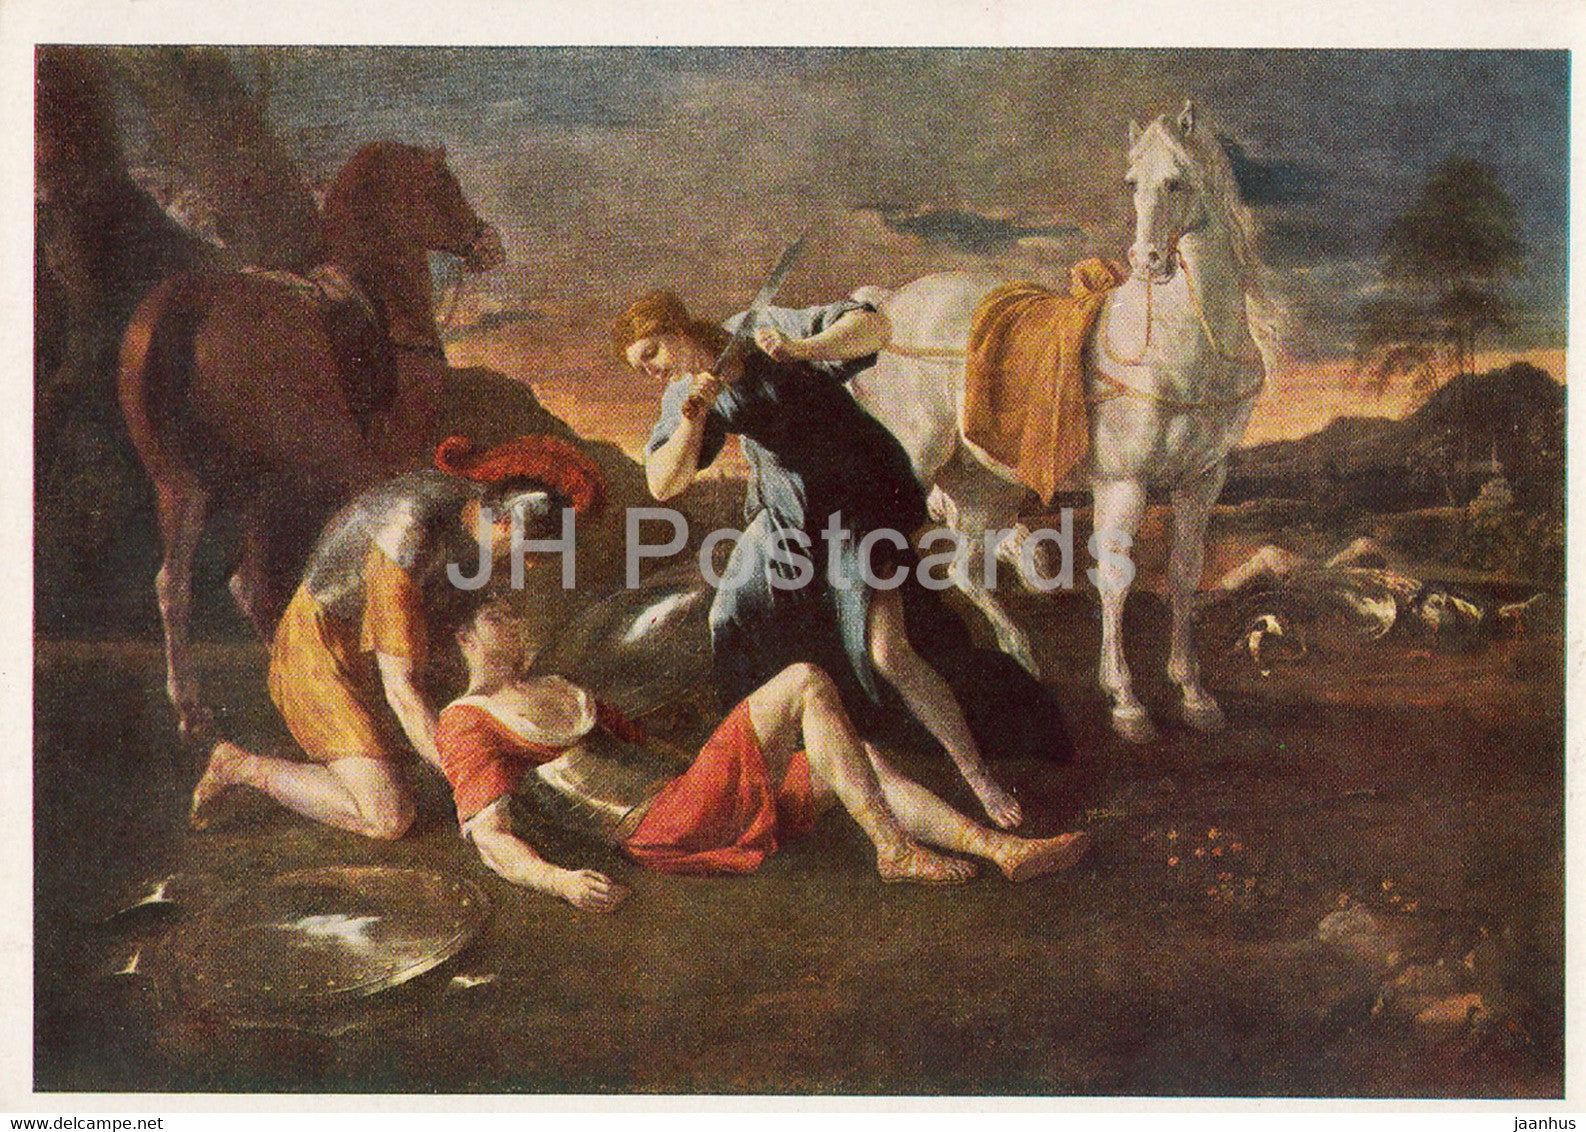 painting by Nicolas Poussin - Tancred and Hermine - horse - French art - 1966 - Russia USSR - unused - JH Postcards